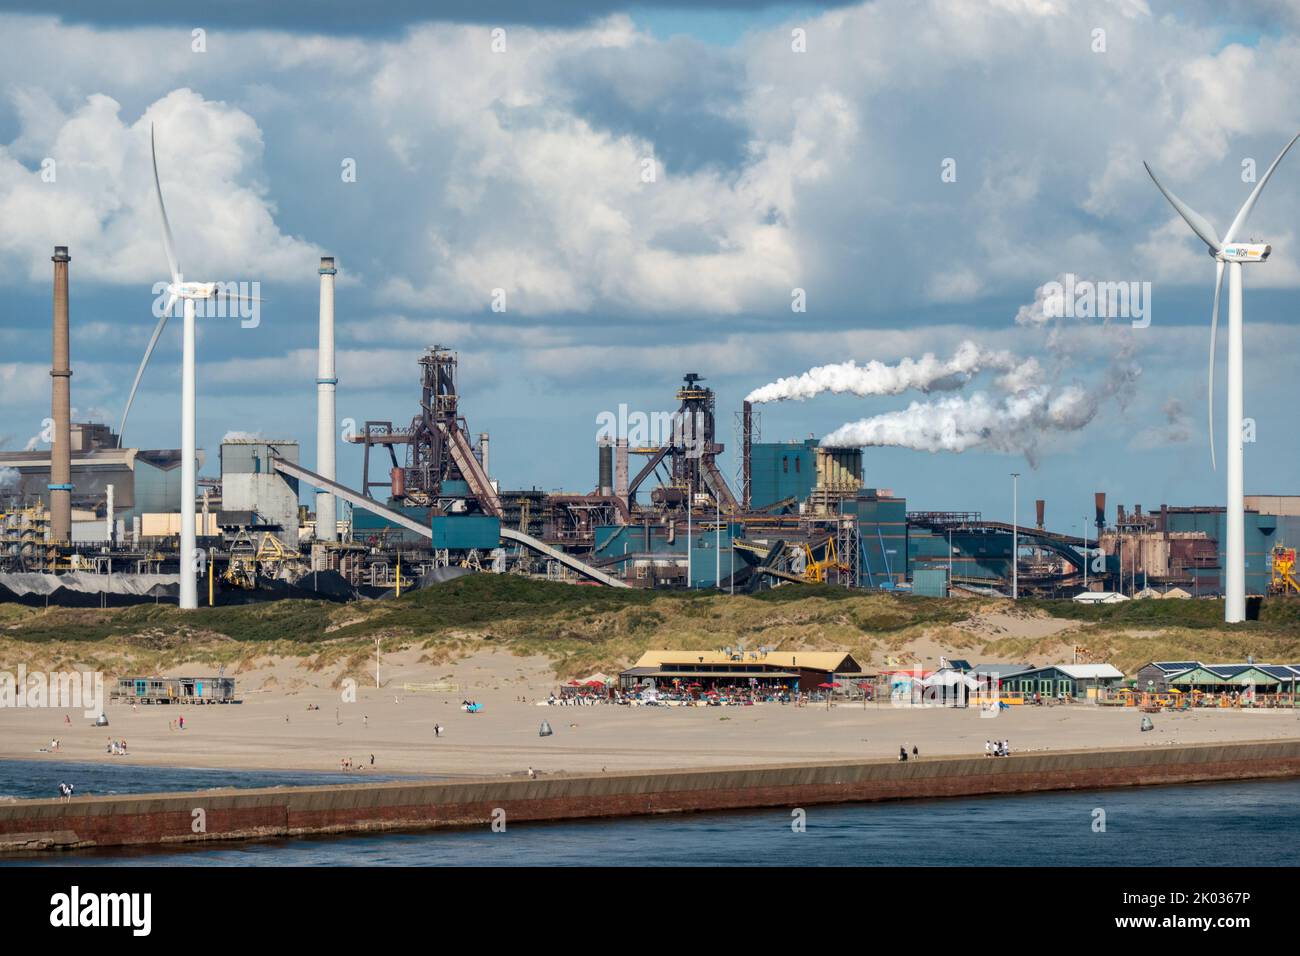 People enjoy the beach of Ijmuiden near the Tata Steel plant on News  Photo - Getty Images